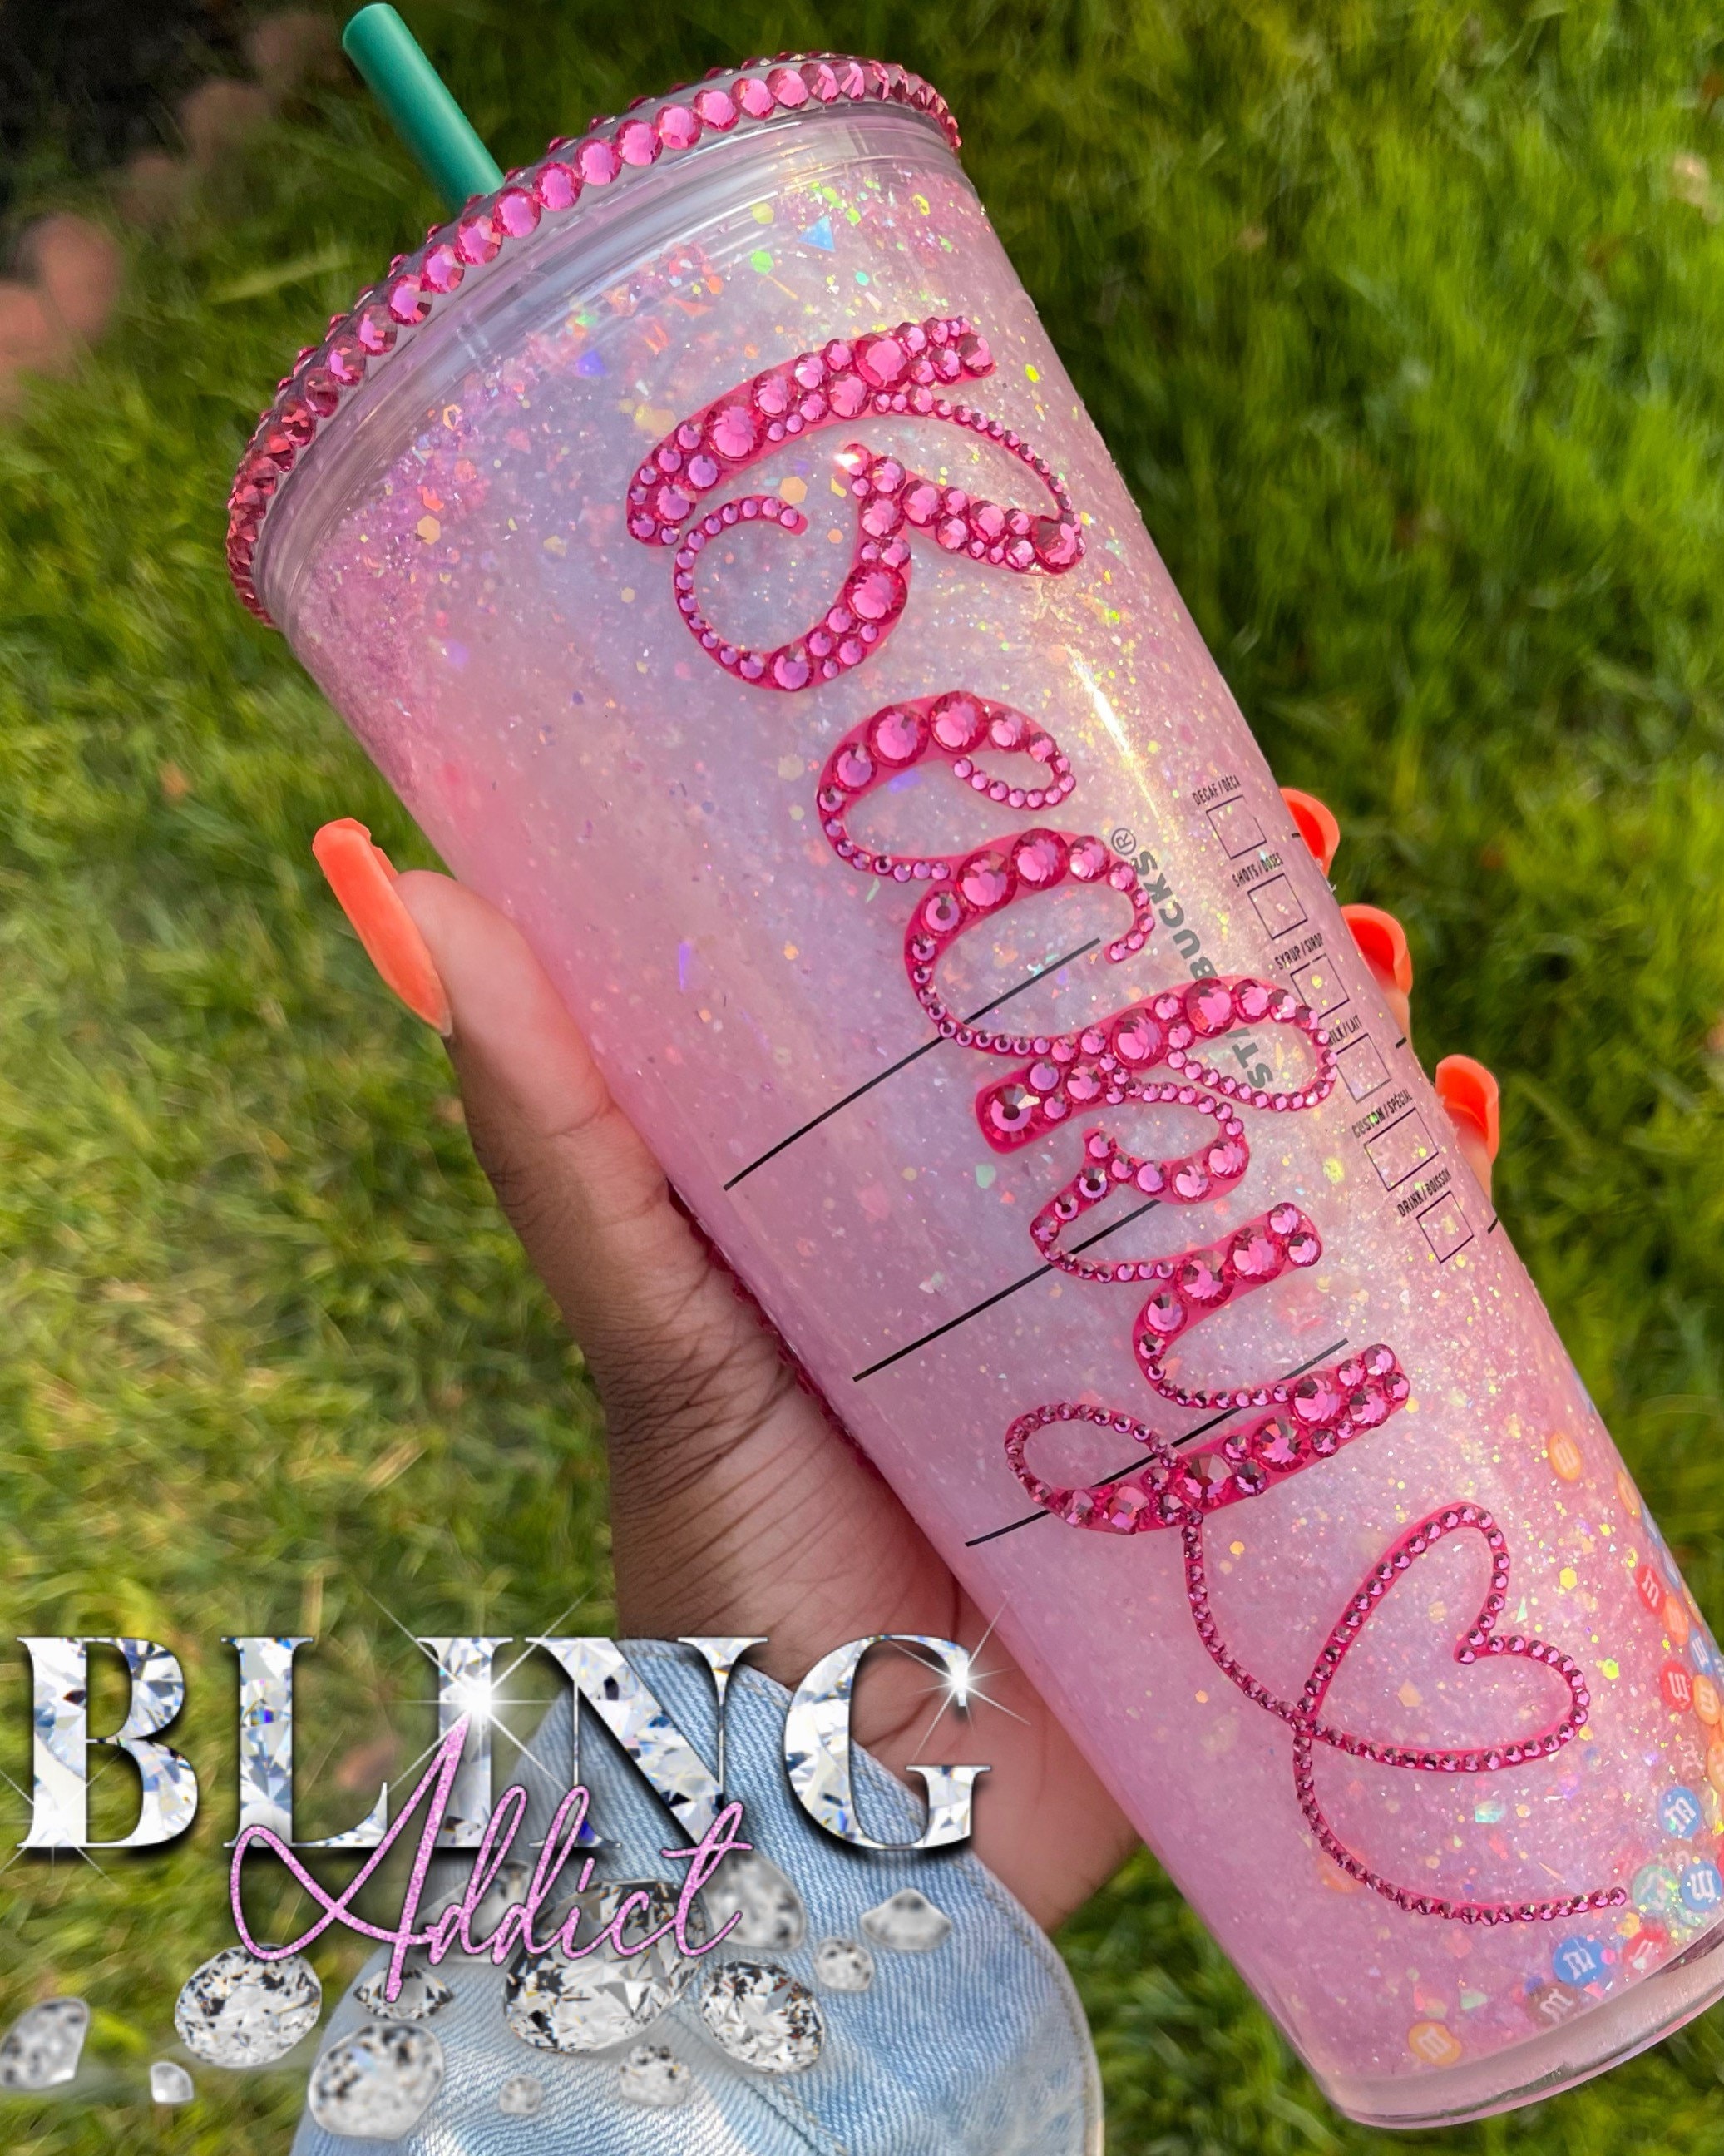 You Can Get A Starbucks Cup That Is Covered In Glitter and Glam